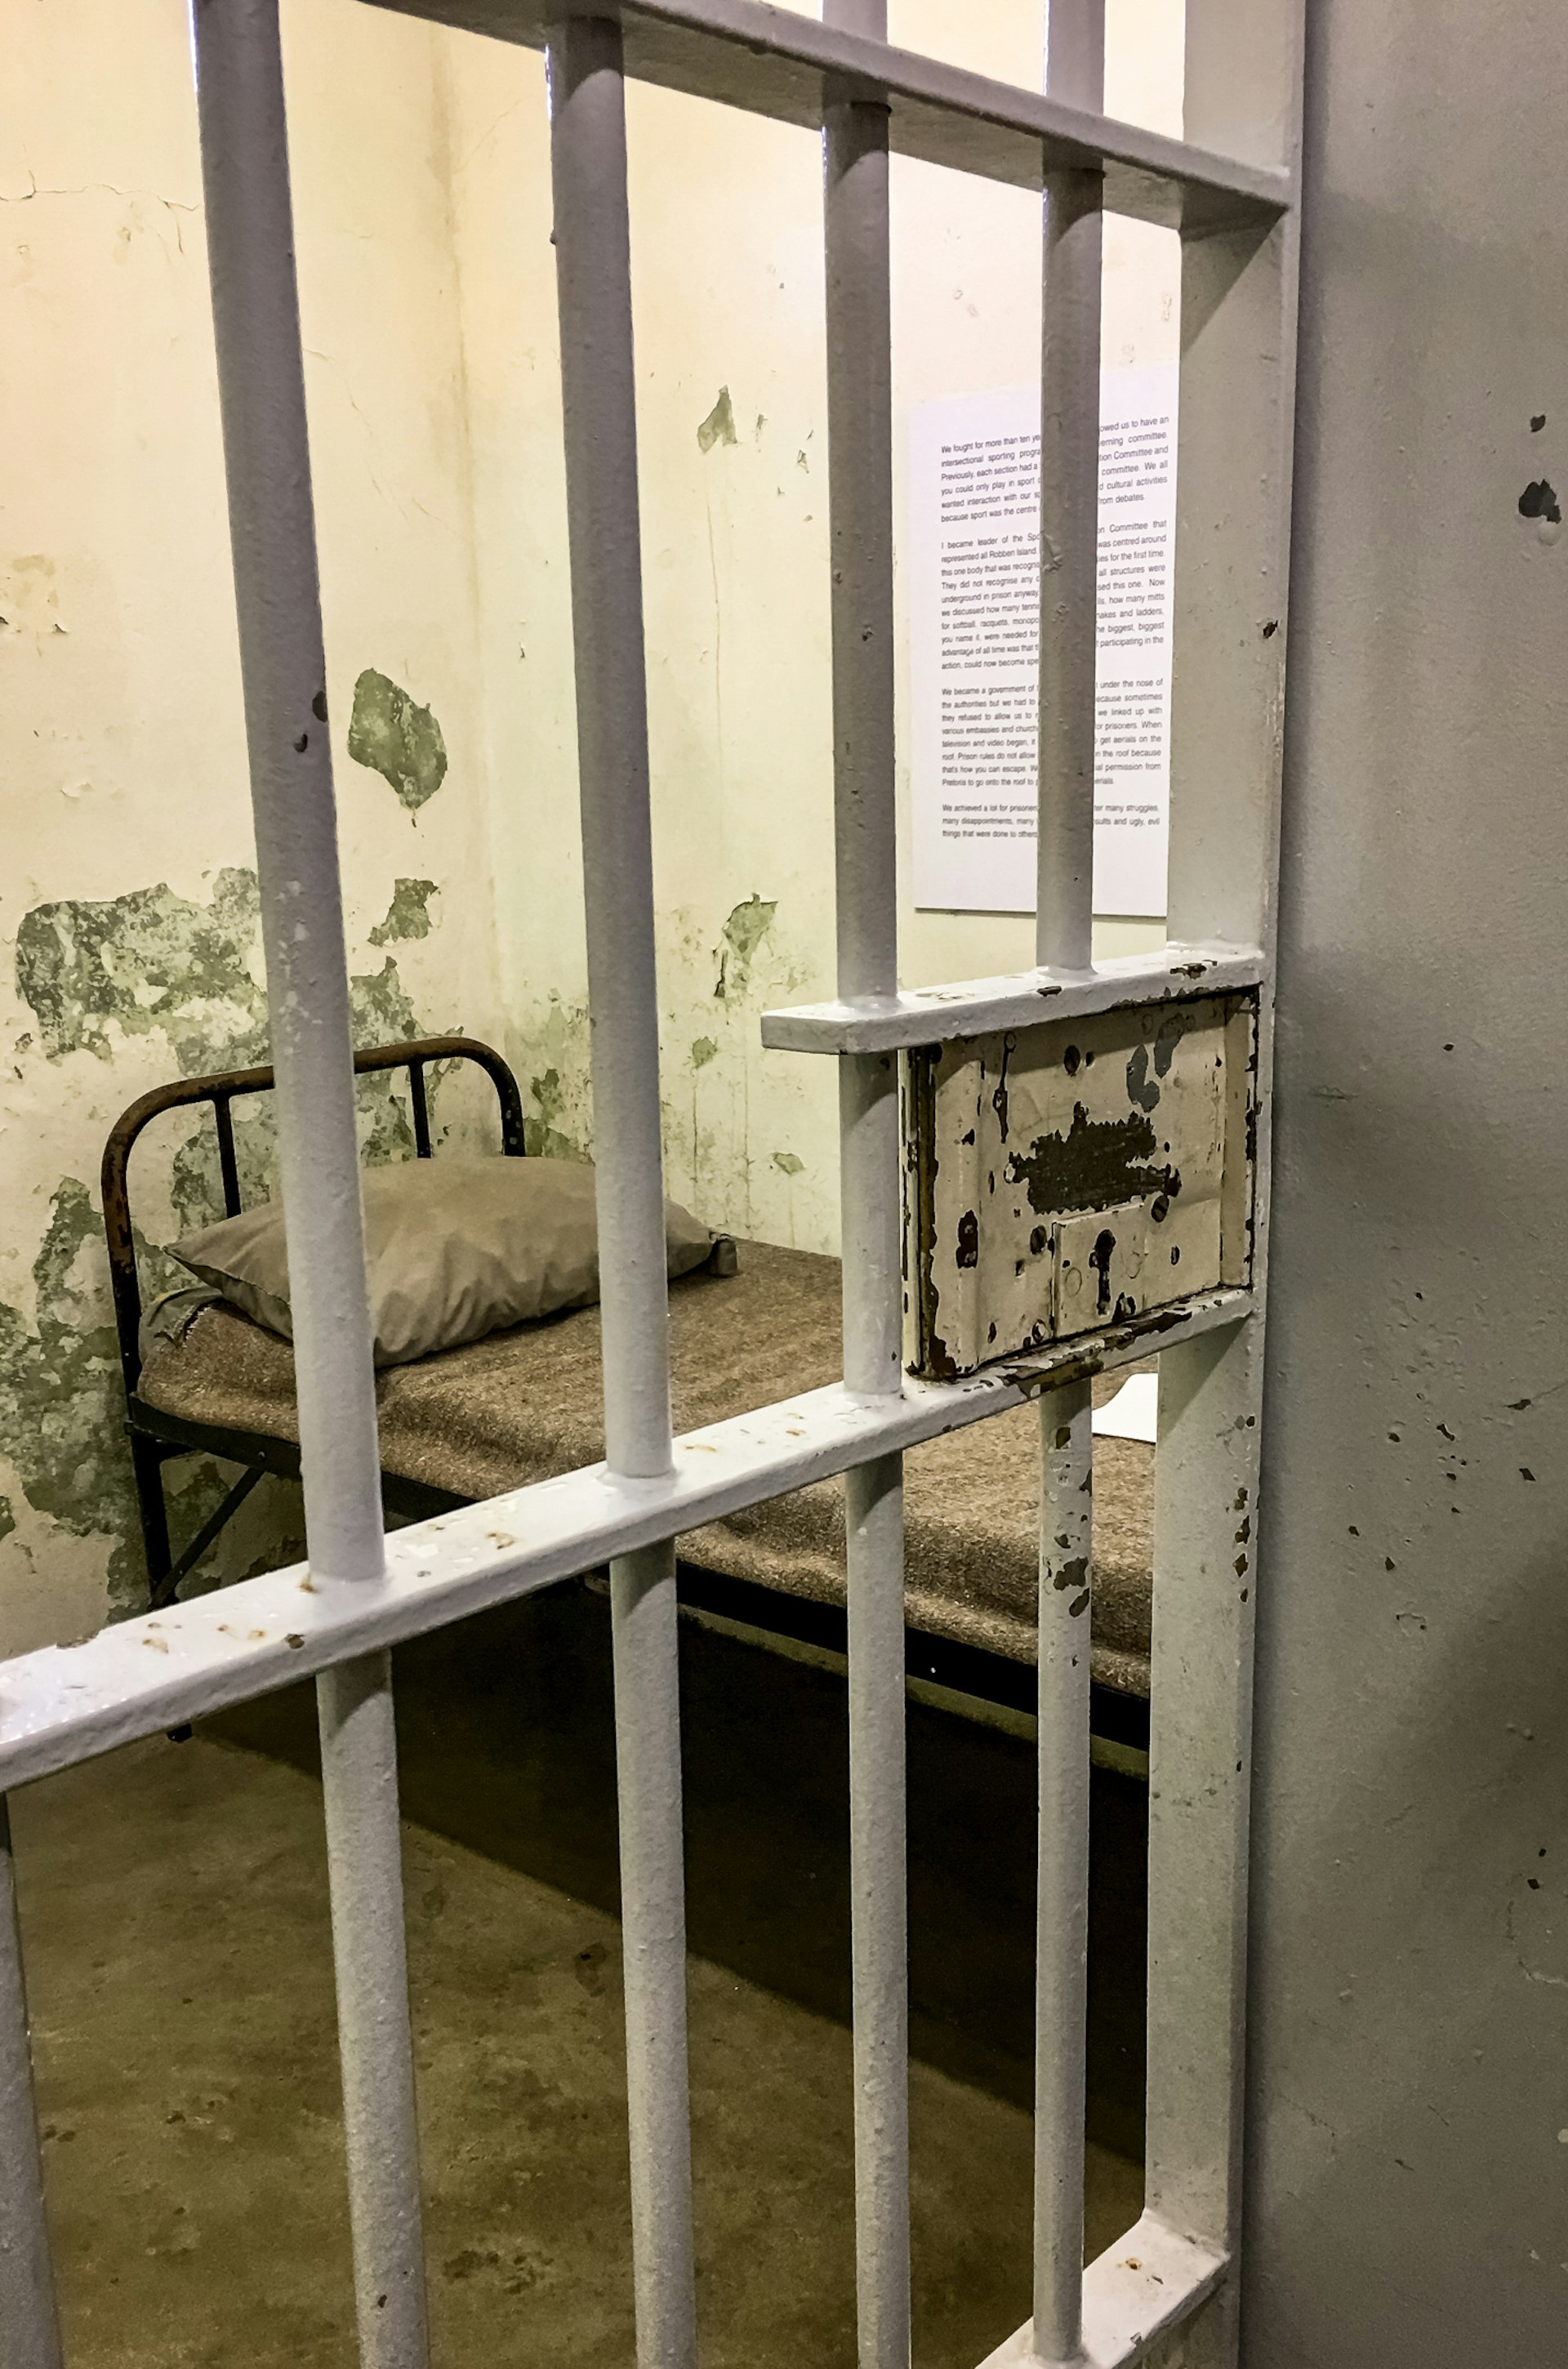 A small bed is visible within a tiny cell through the barred prison door.